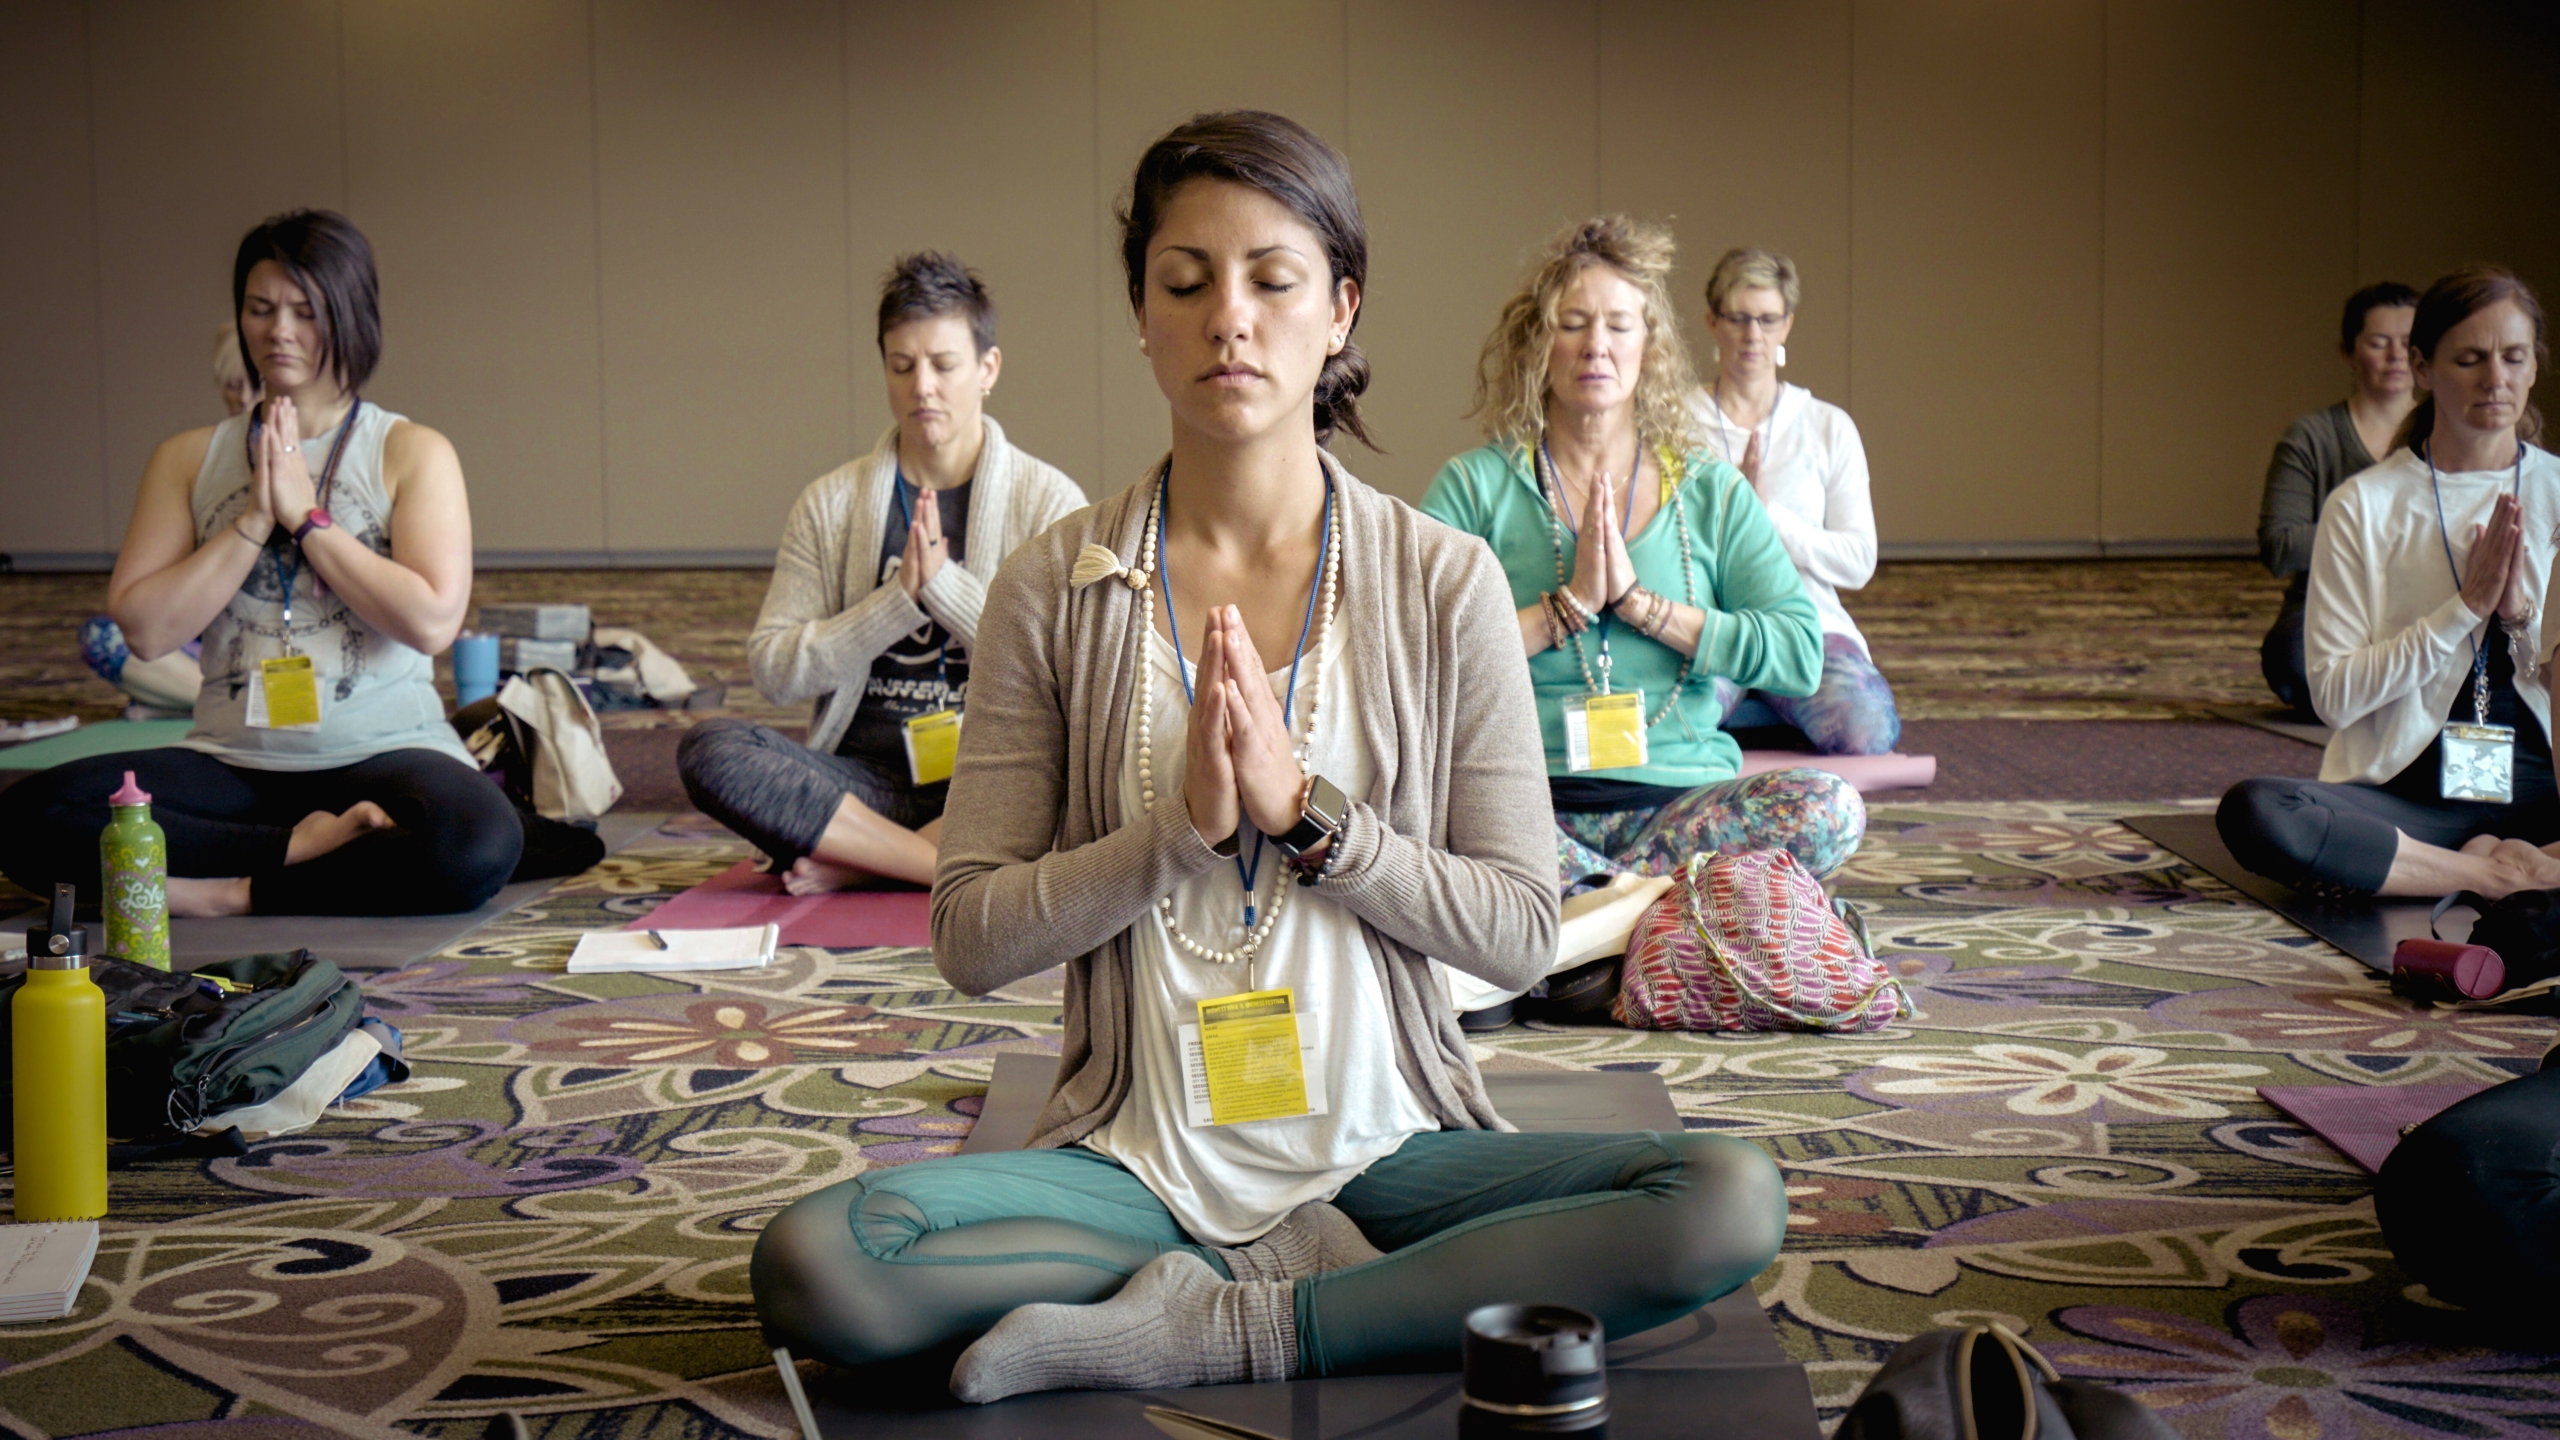 6 ways to include yoga at work